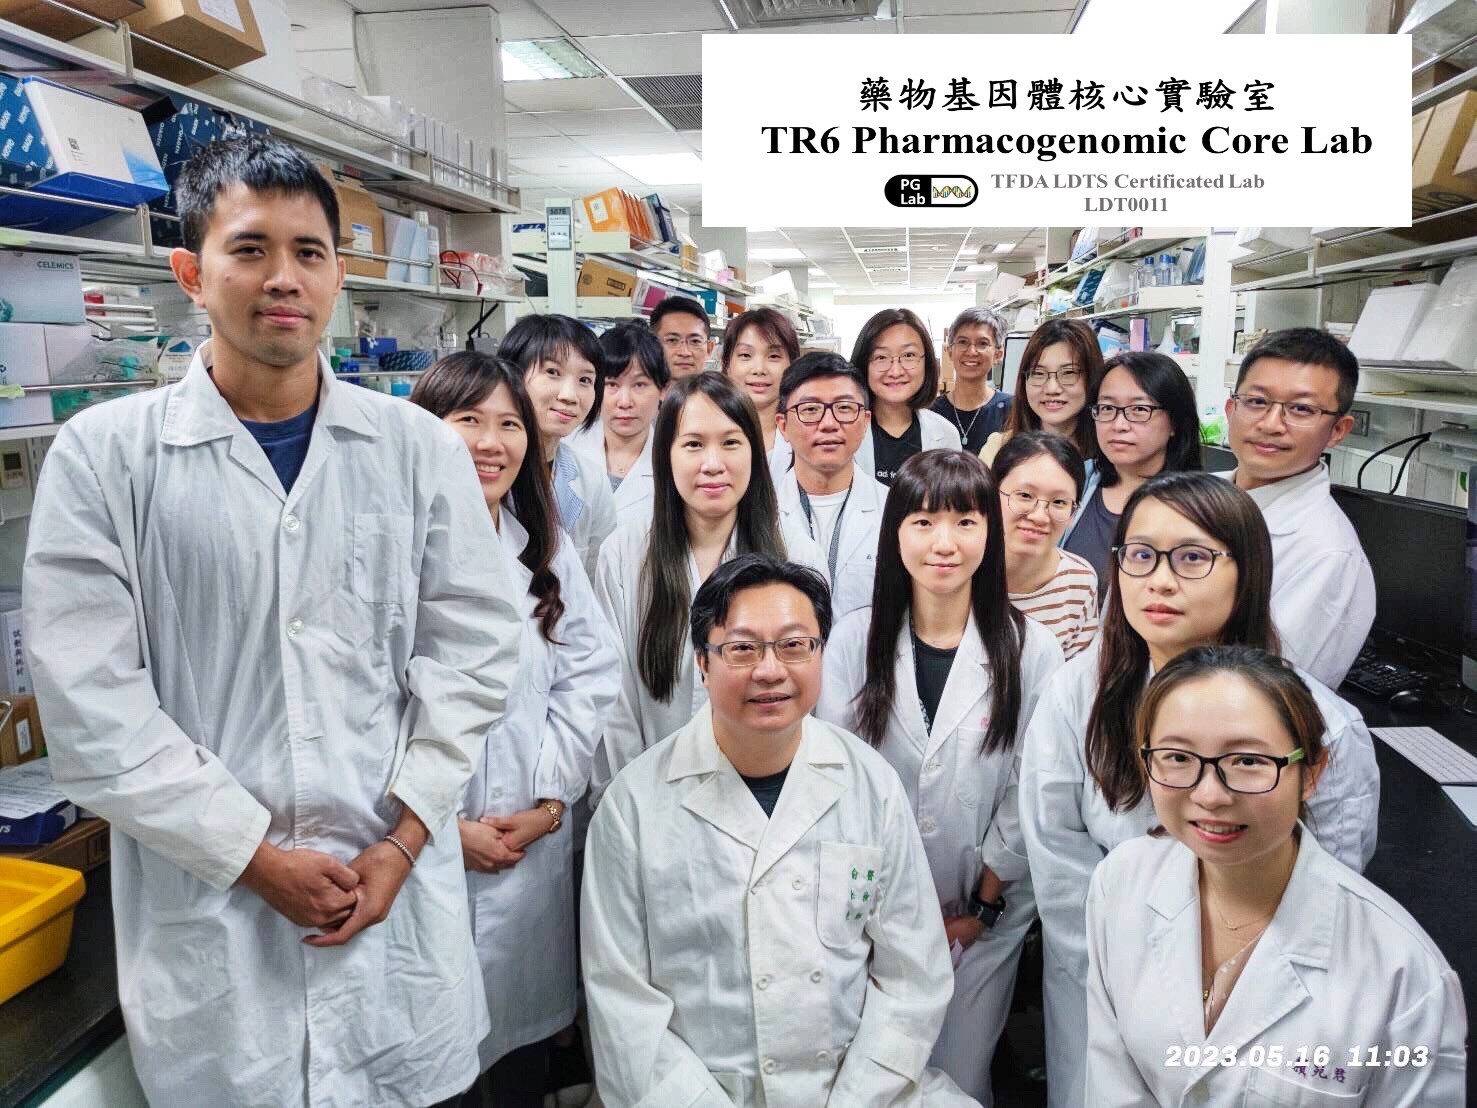 Taking the Lead: Taiwan's Transformation from Precision Medicine to Precision Health